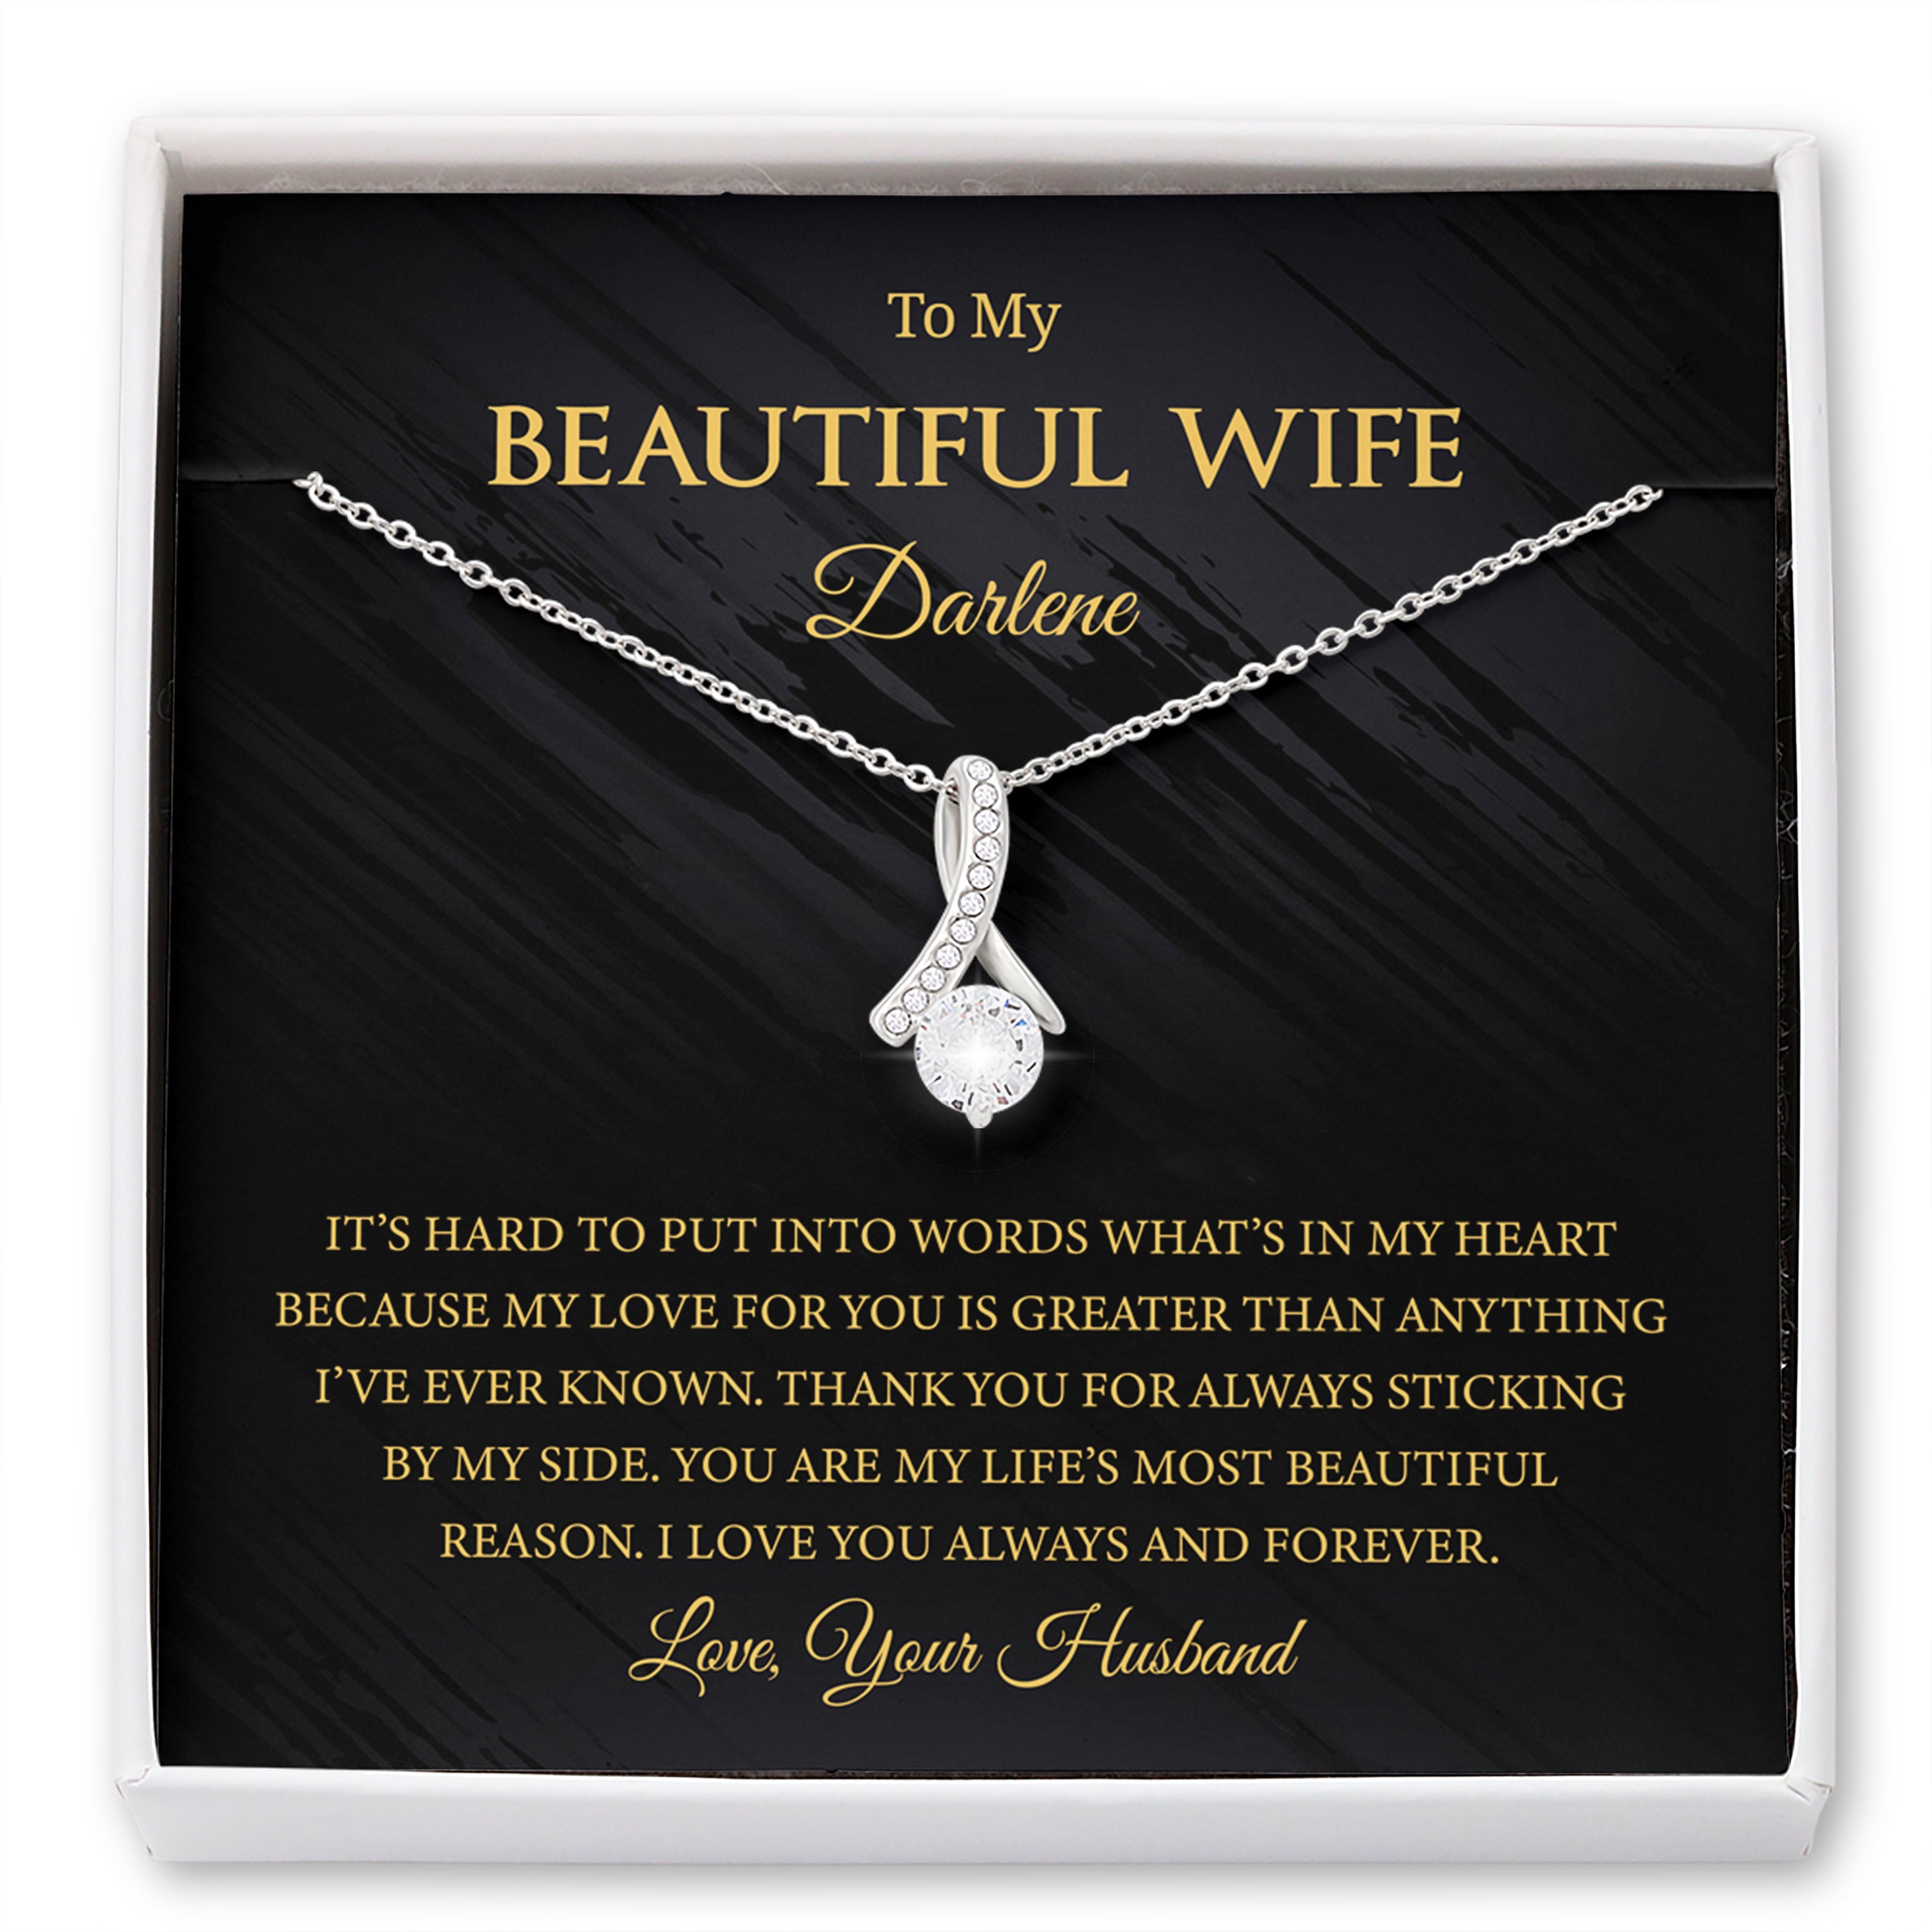 DESTWA Sentimental Gifts for Wife from Husband, Birthday Gifts for Wife, Gifts for Her, Gifts for Wives, Presents for Wife, Best Gift for My Wife